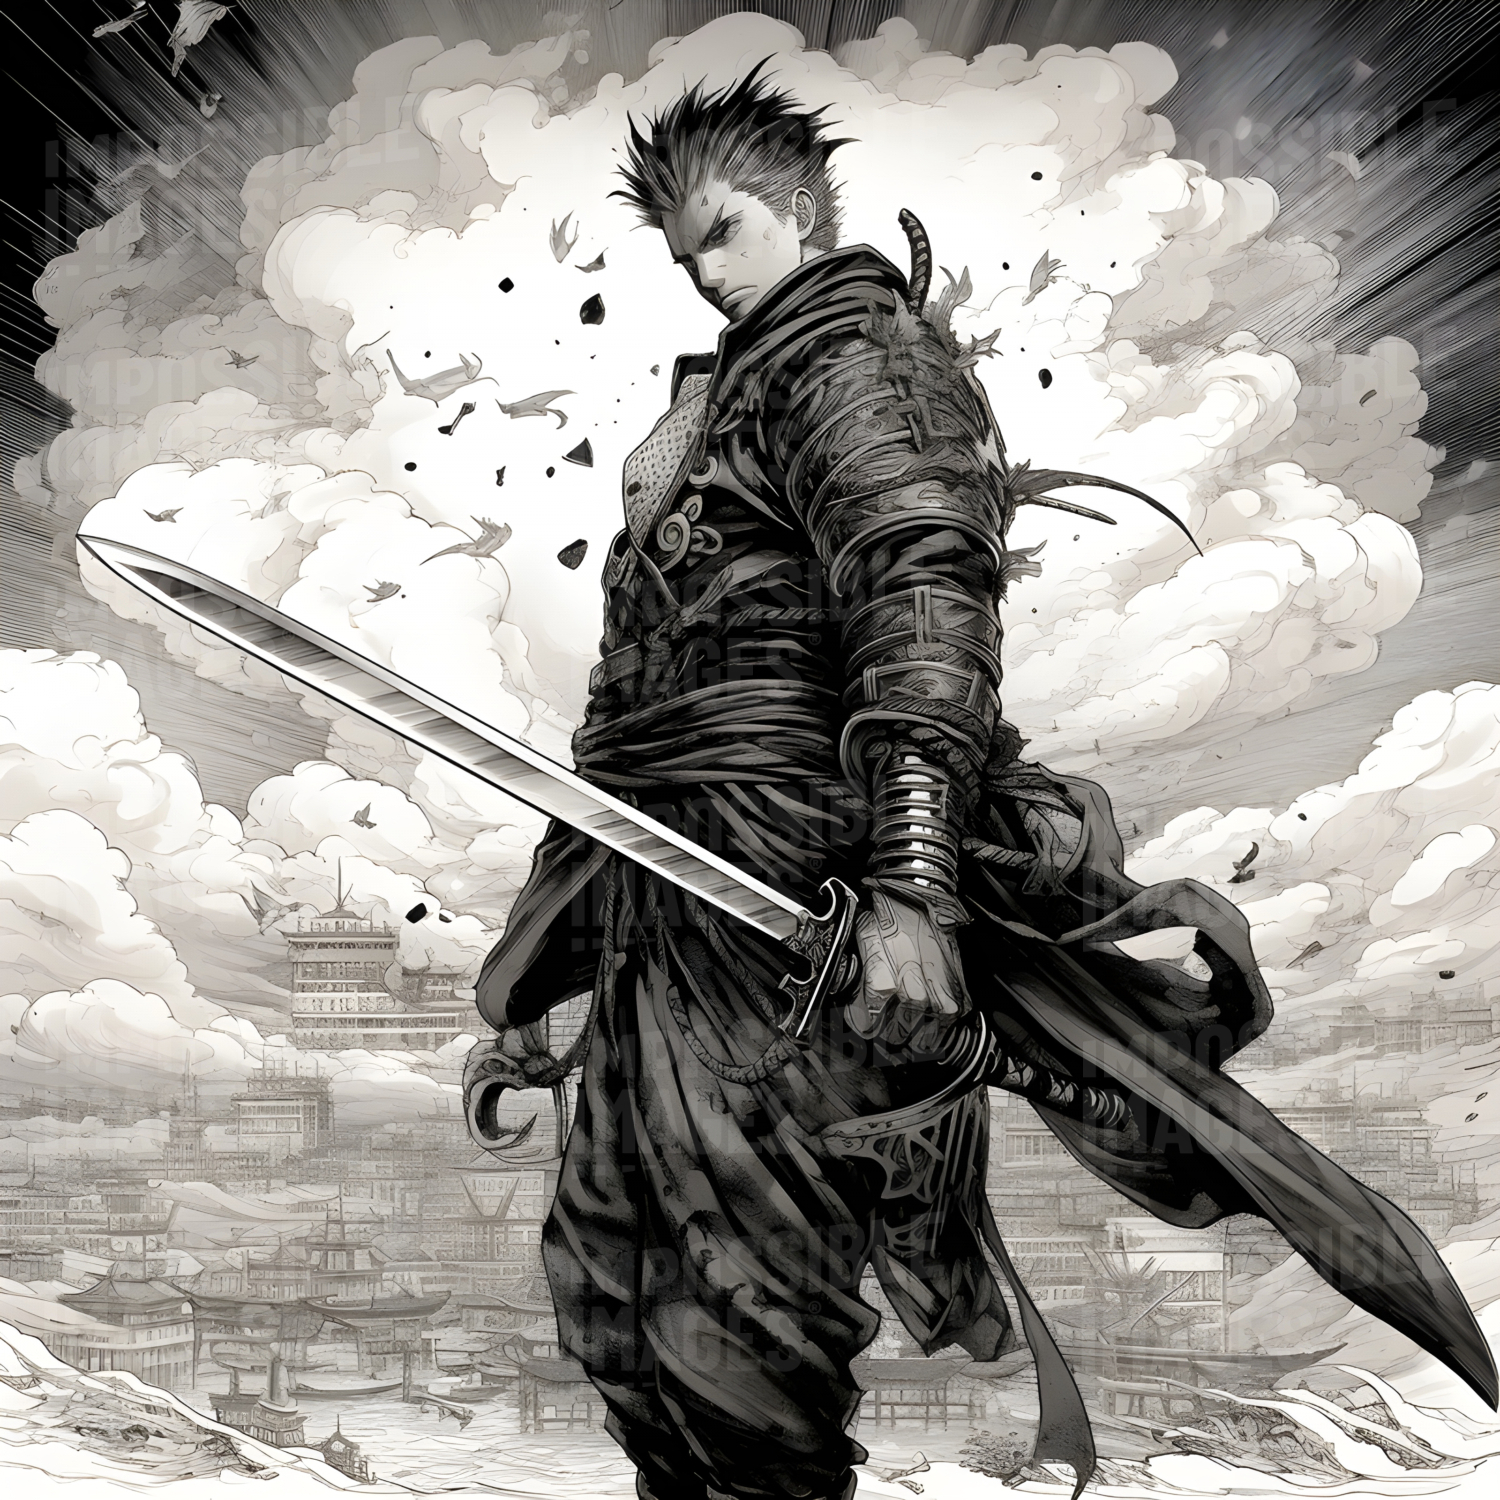 Black and white illustration of a fantasy manga swordsman -  A black and white illustration of a fantasy manga swordsman, with a long sword in hand, wearing a cape and a determined expression.